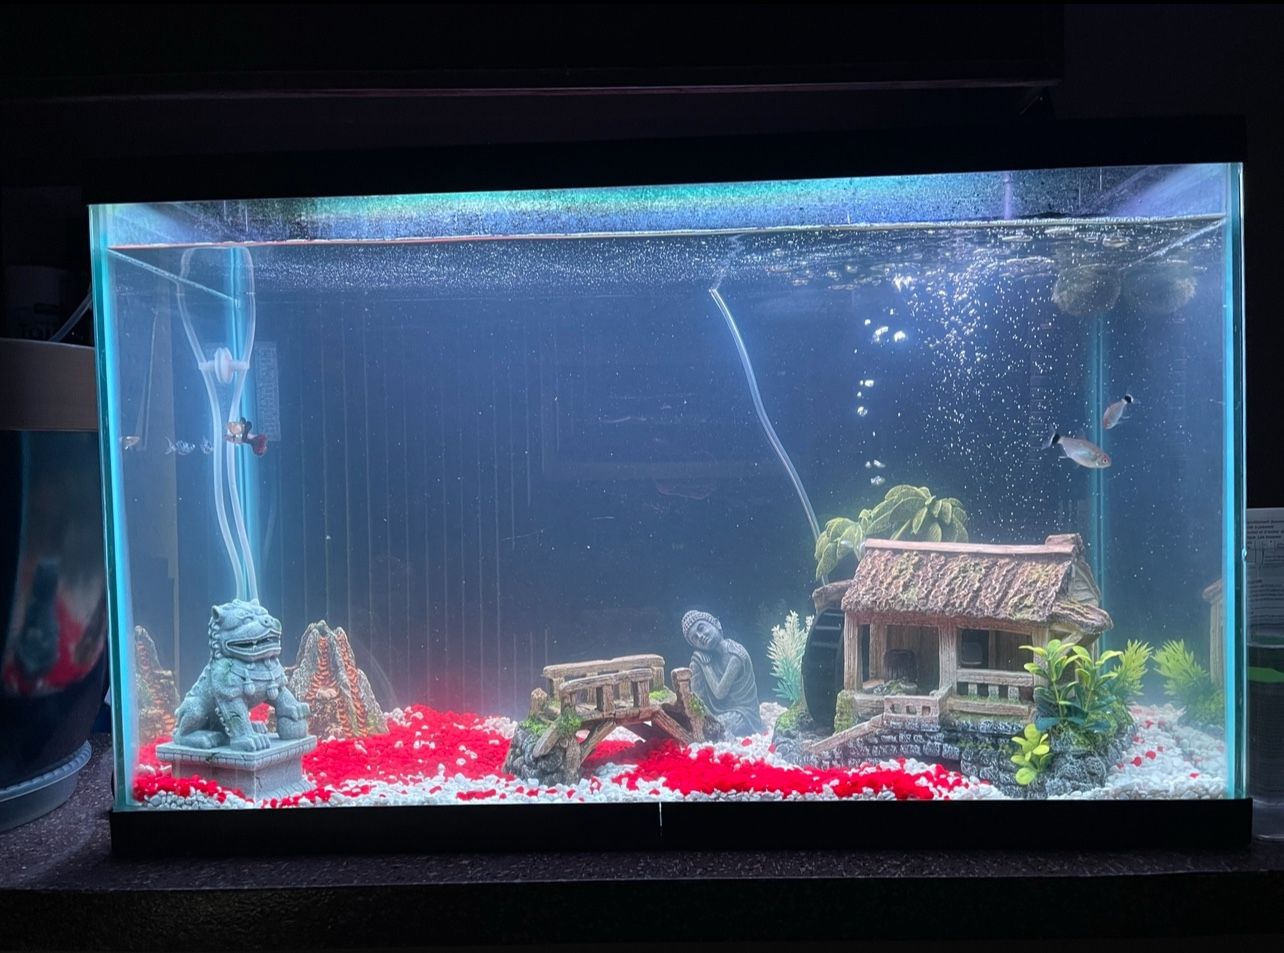  50 Gallon Tank with Filter System and Decor